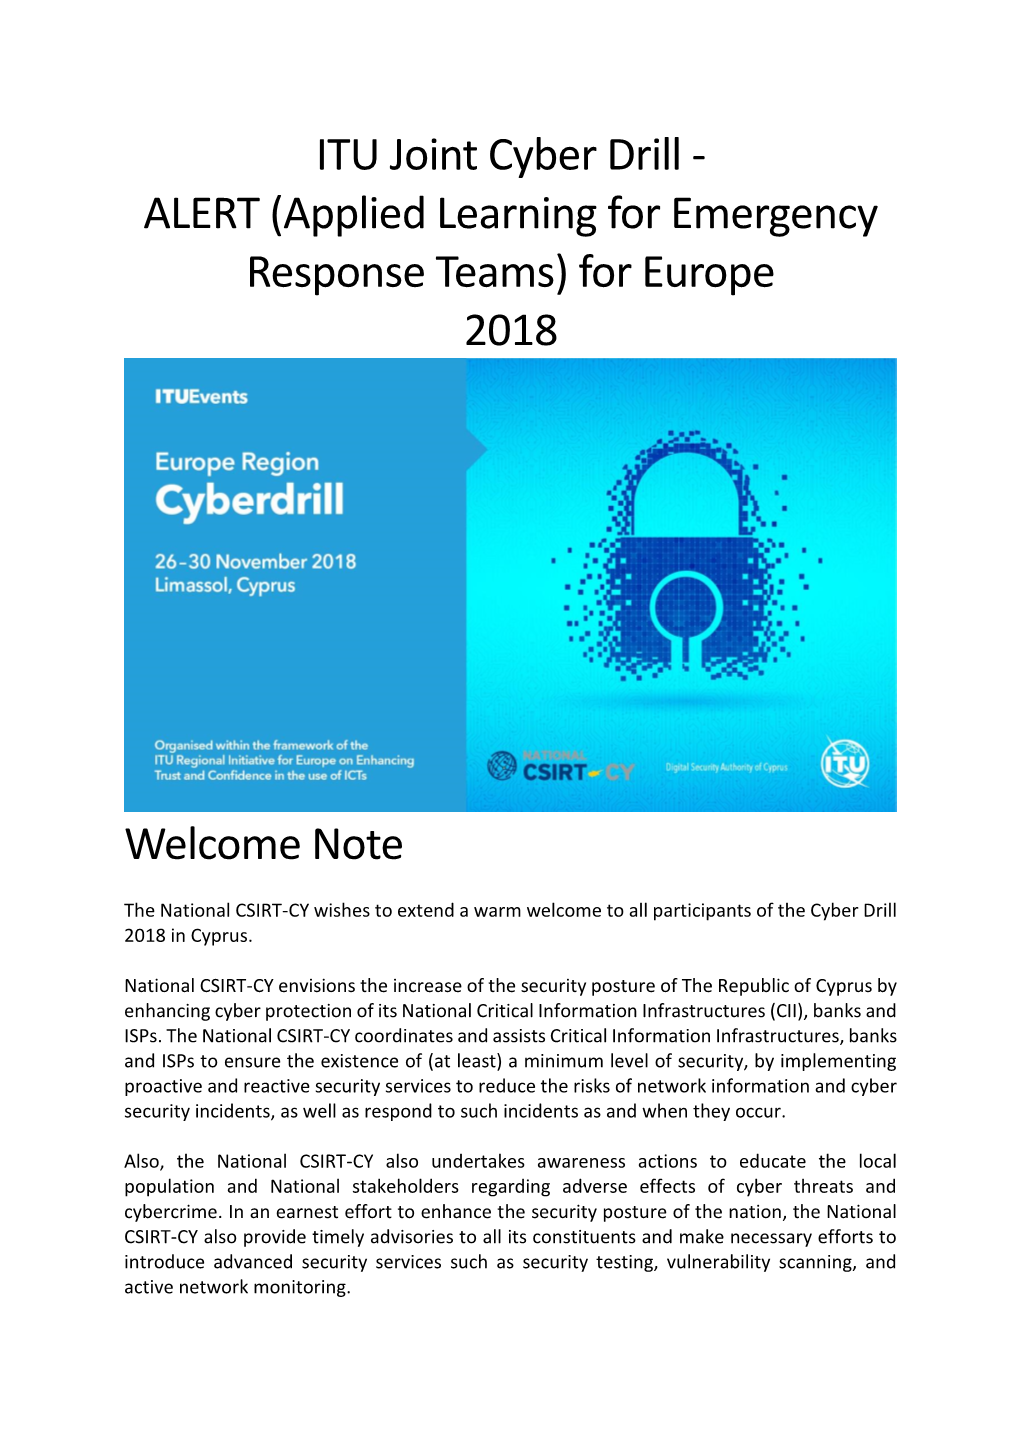 ITU Joint Cyber Drill - ALERT (Applied Learning for Emergency Response Teams) for Europe 2018